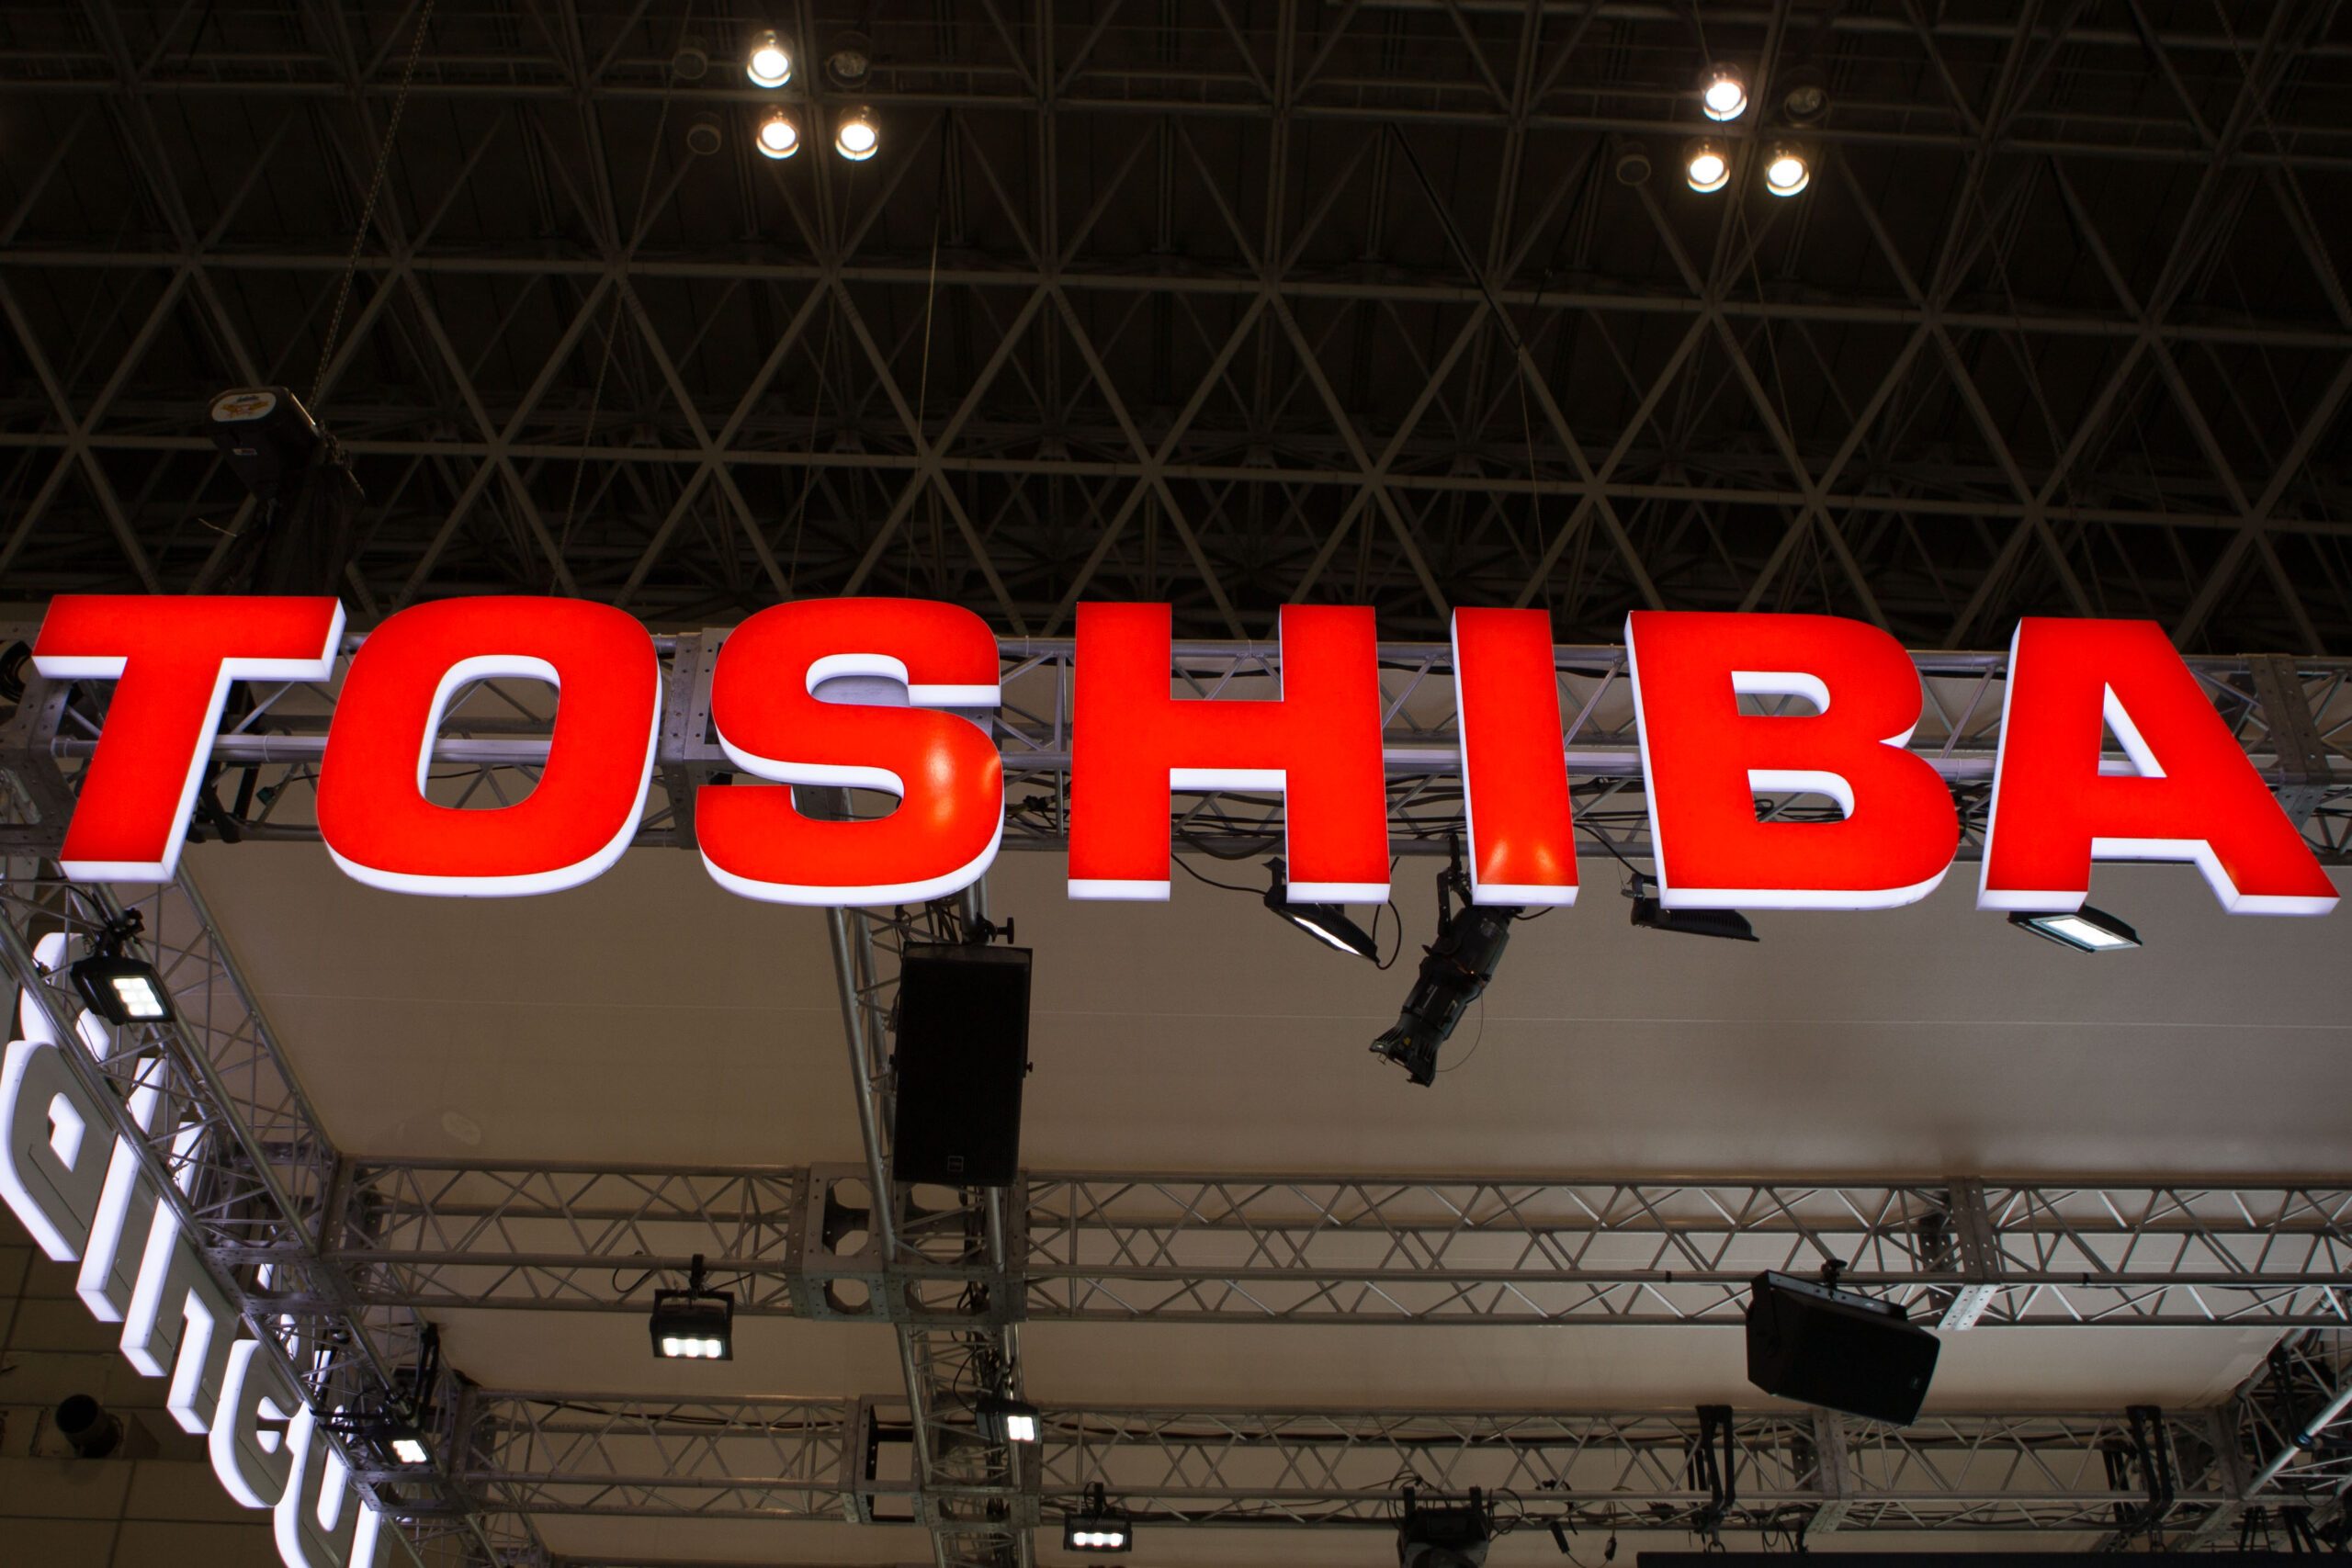 Japan’s pension fund sues Toshiba over accounting scandal